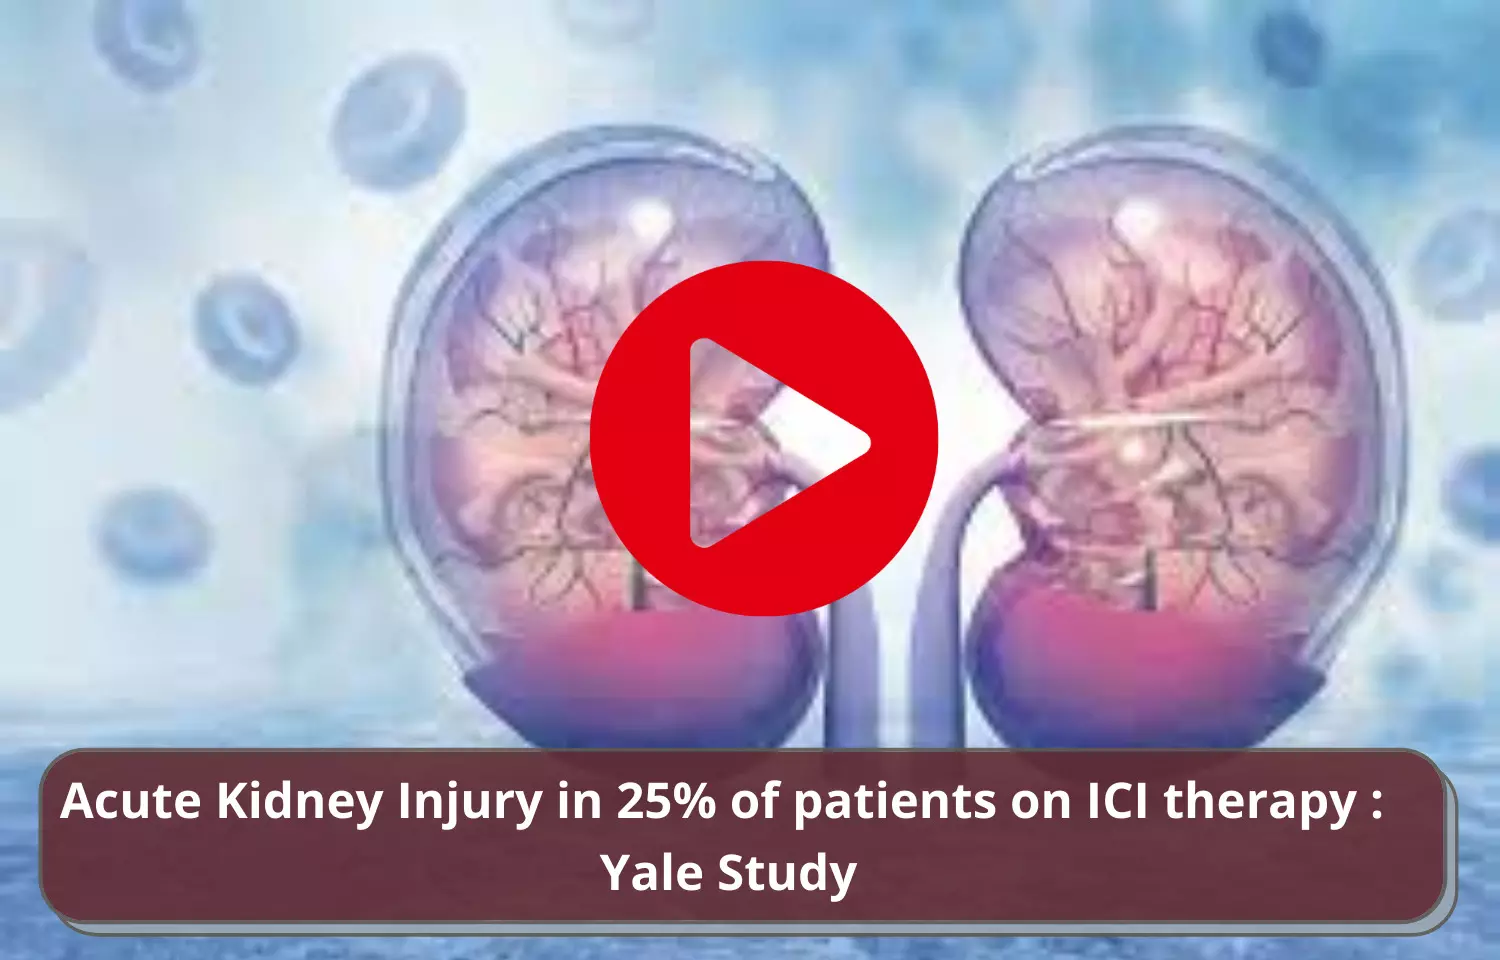 Acute Kidney Injury in 25% of patients on ICI therapy: Yale Study